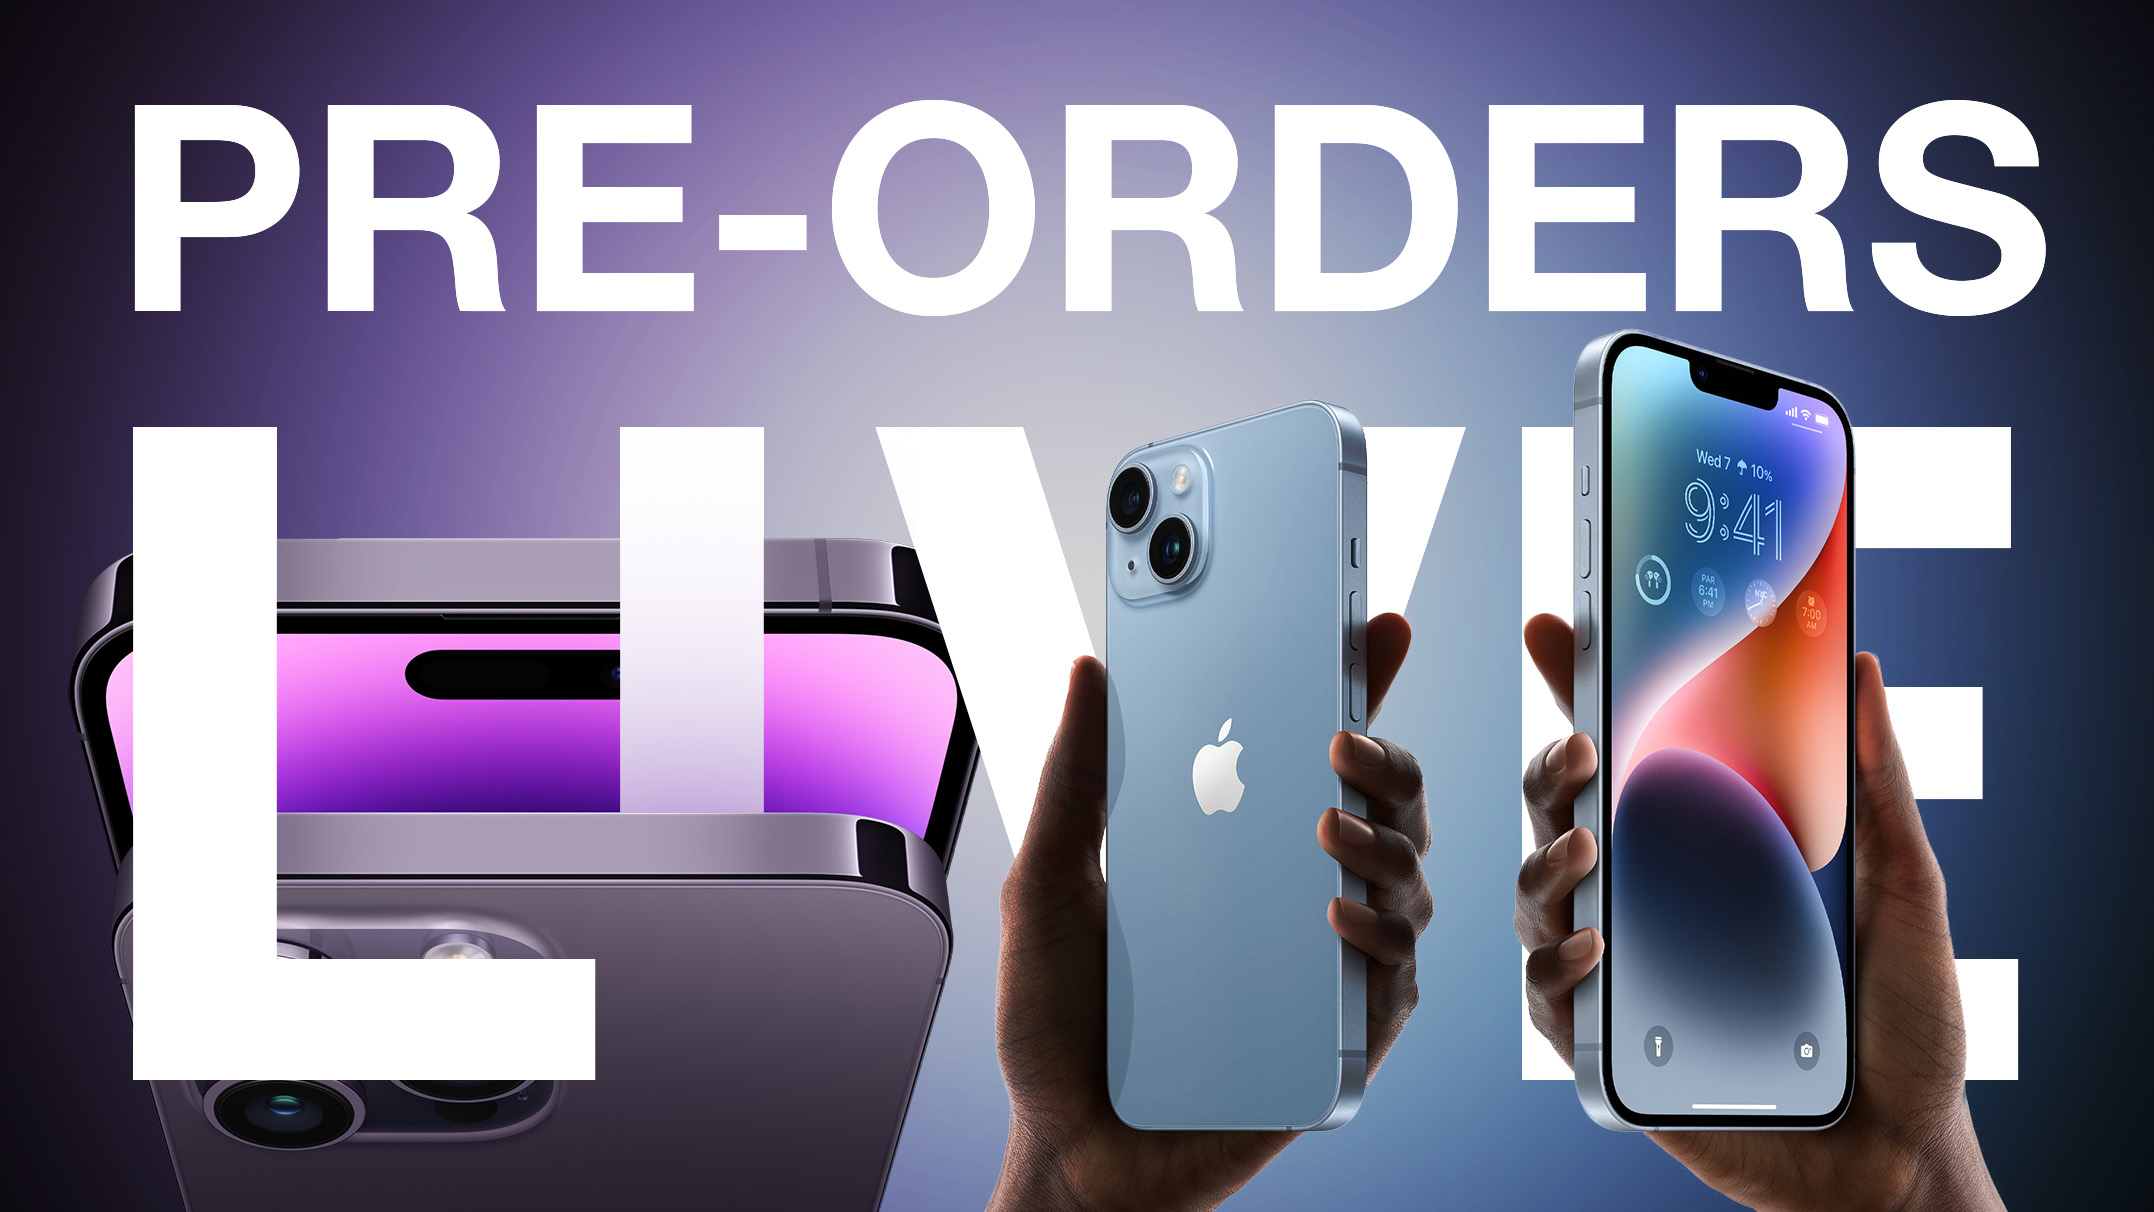 iPhone 14, iPhone 14 Plus, iPhone 14 Pro, iPhone 14 Pro Max, and AirPods Pro 2 Now Available for Pre-Order